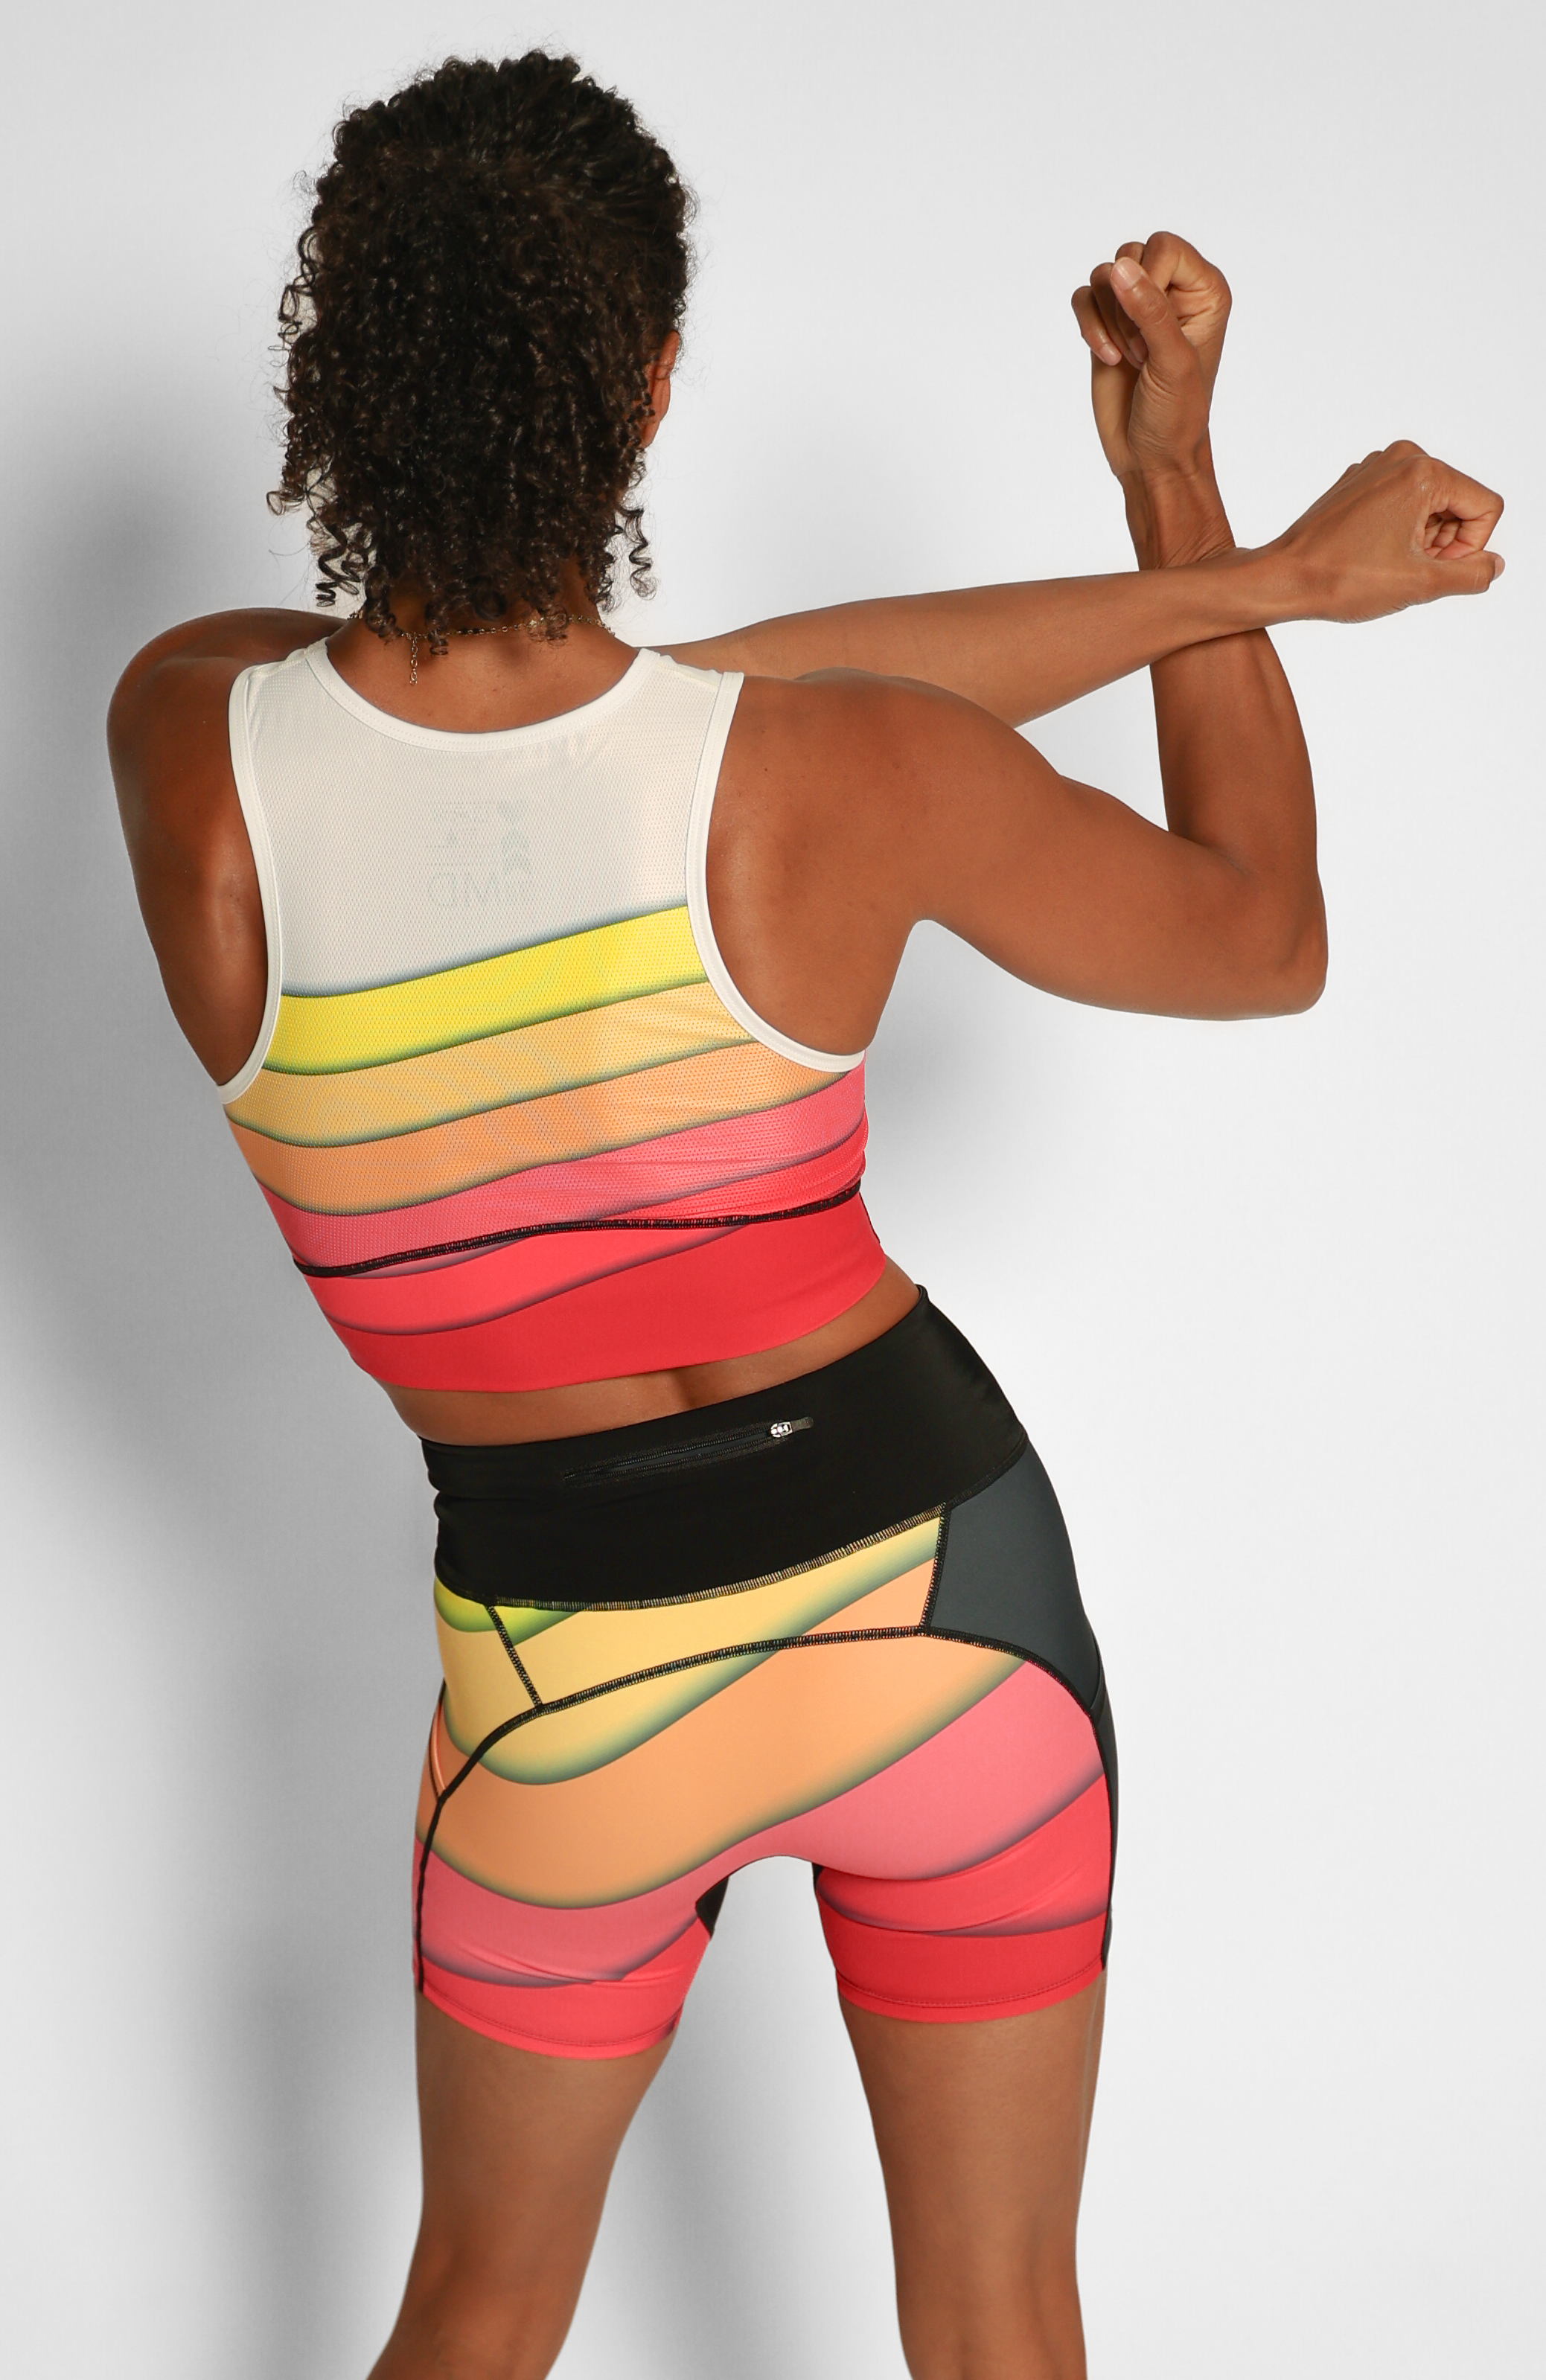 Coeur Sports Run Crop Top All Together Collection 23 Women's Running Tech Crop